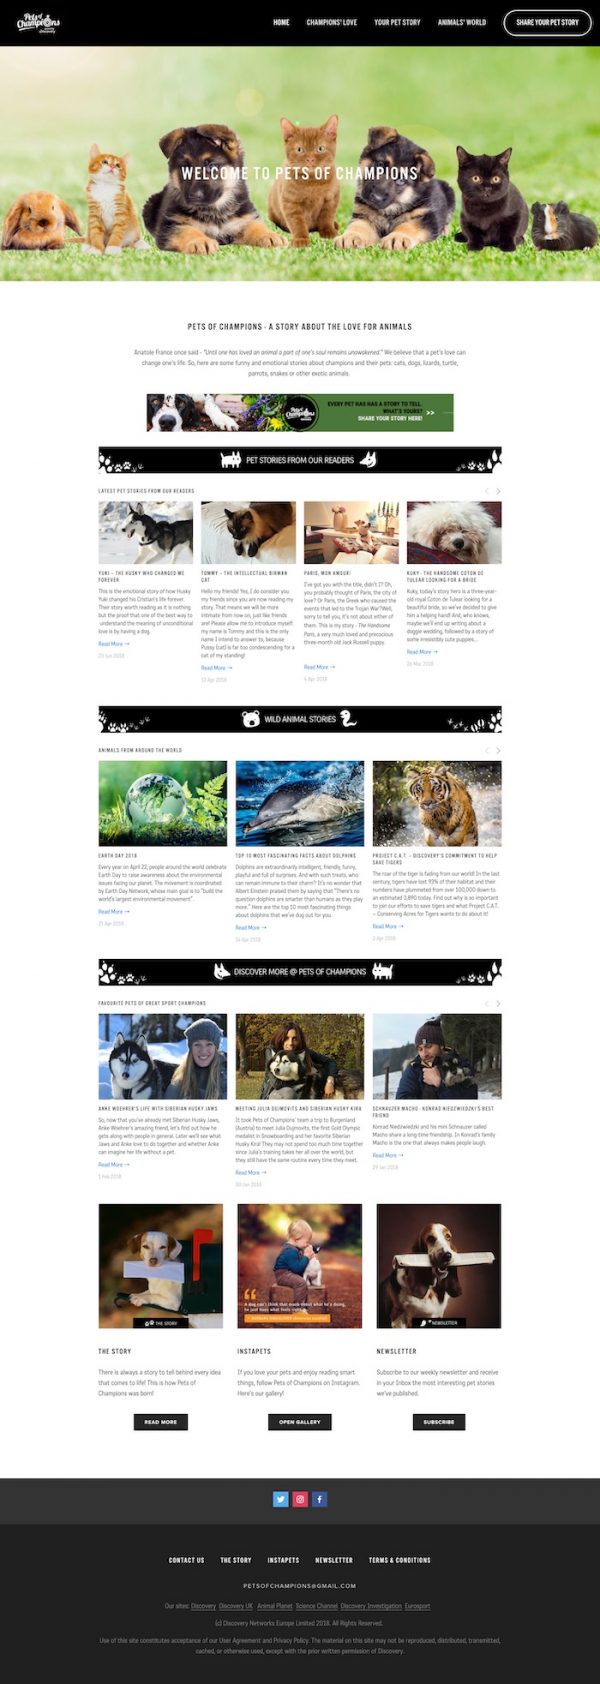 Pets of Champions - homepage